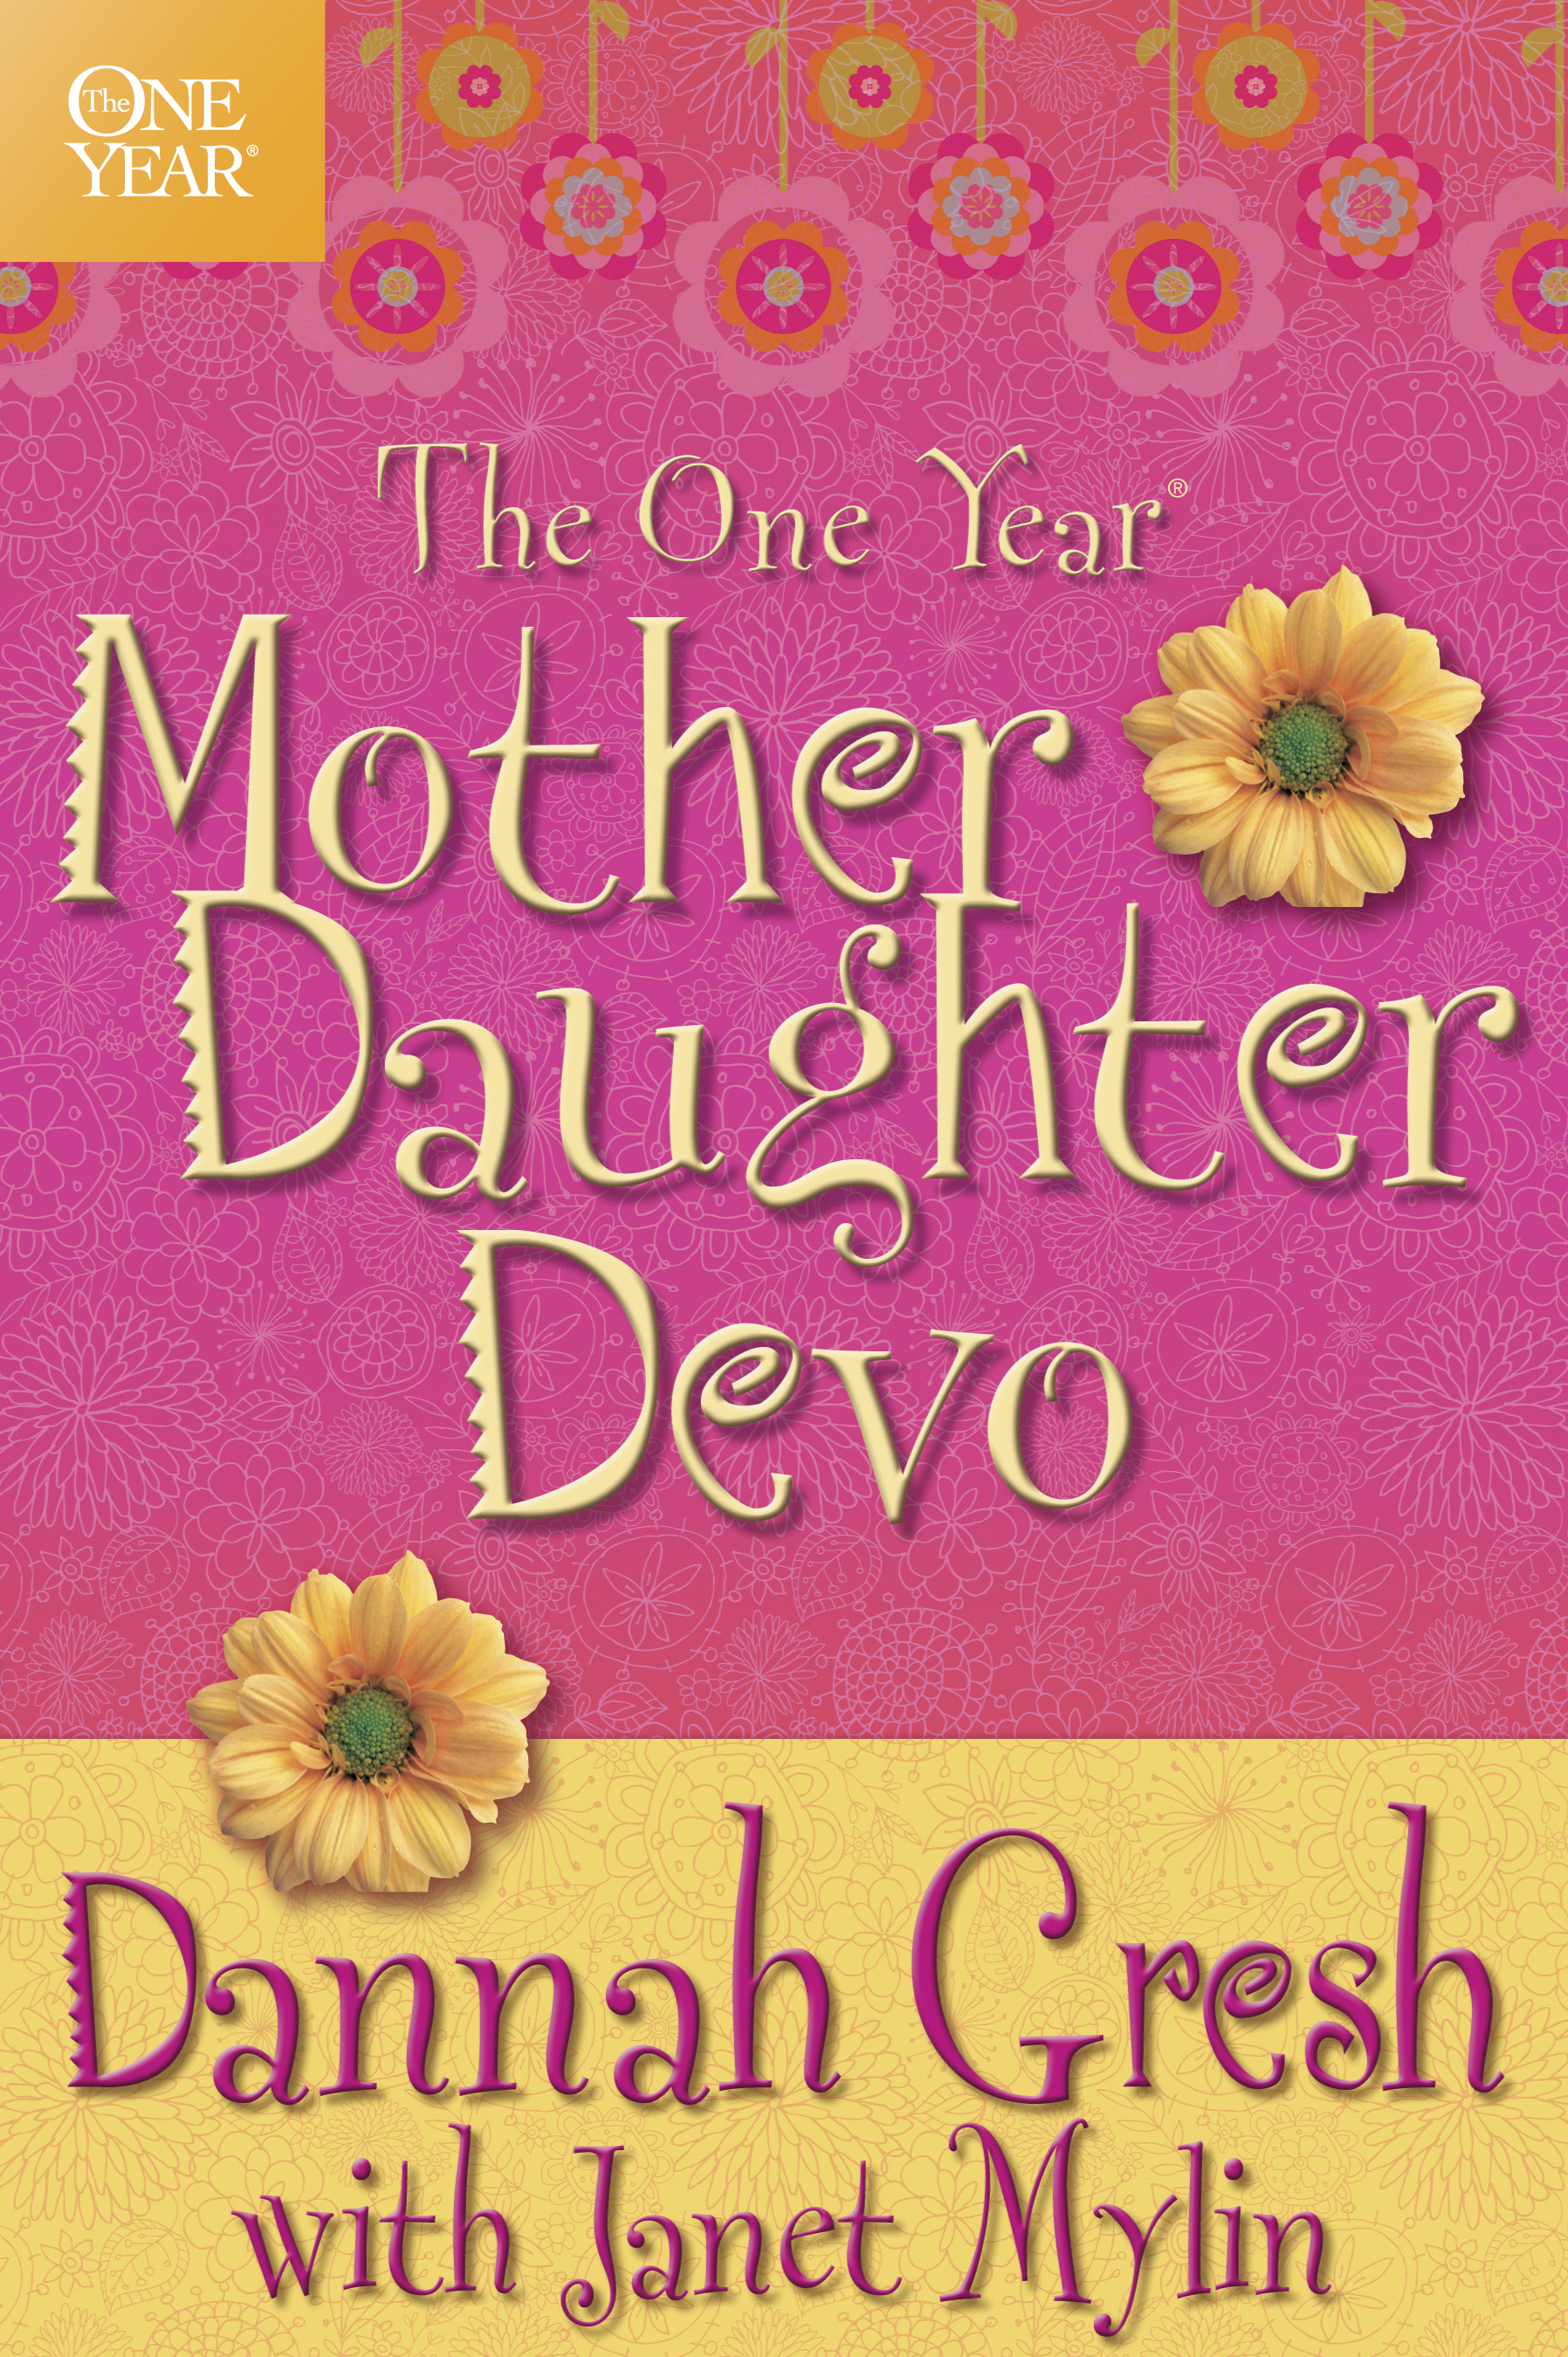 The One Year Mother-Daughter Devo (Paperback) - image 1 of 1